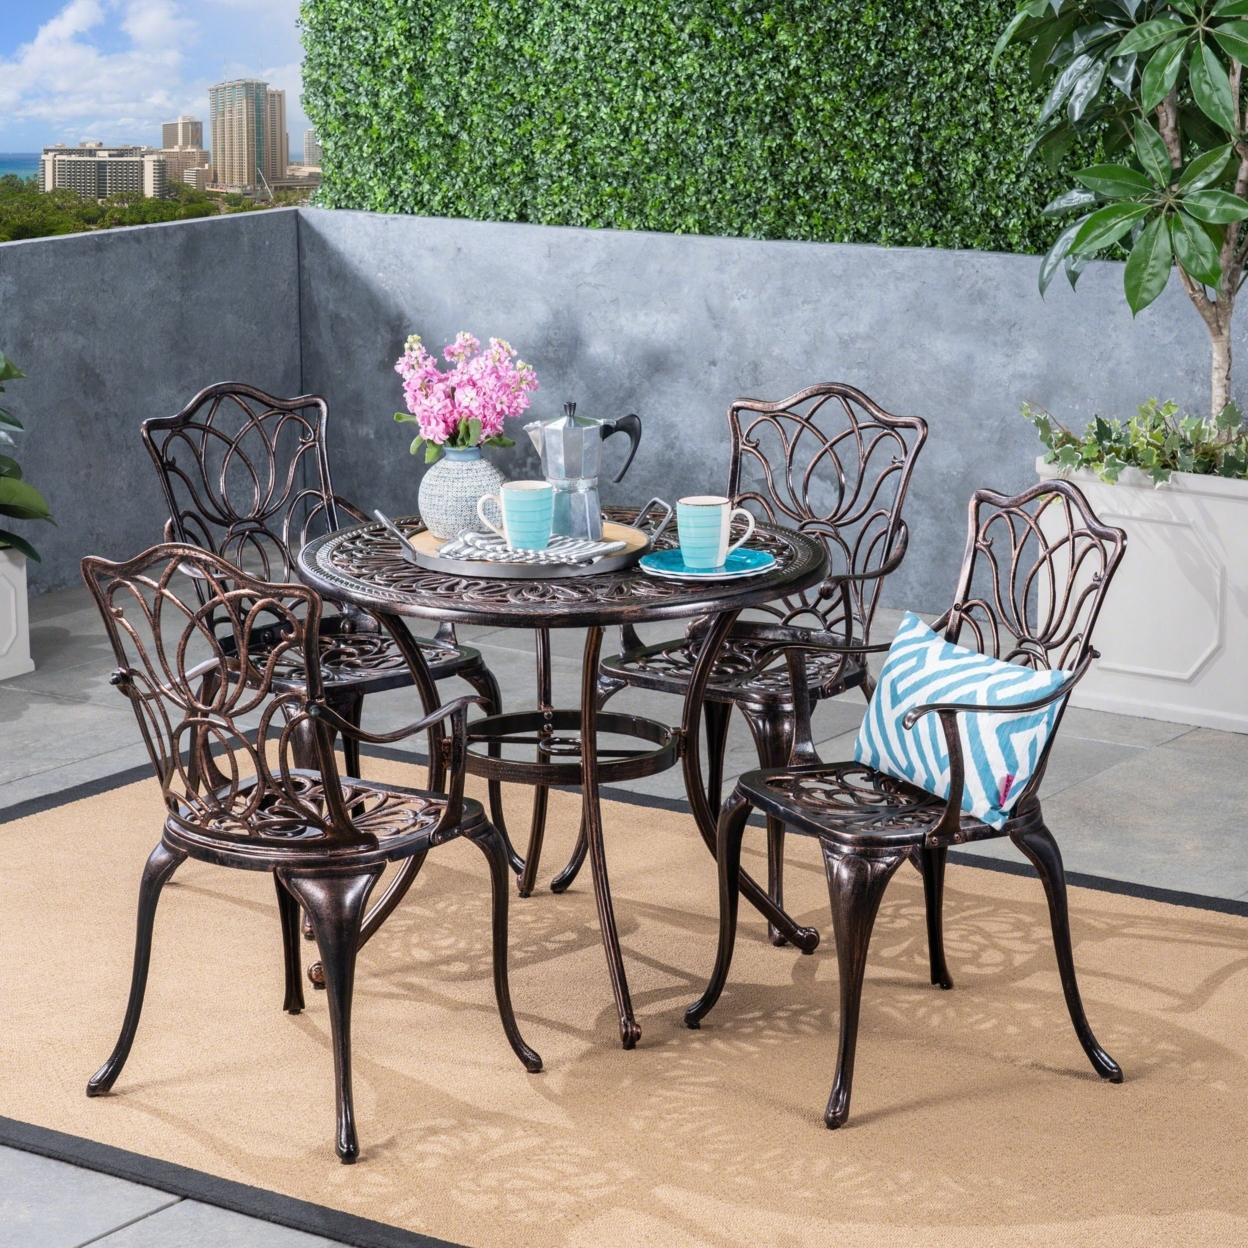 Barbara Outdoor 4-Seater Cast Aluminum Round-Table Dining Set, Shiny Copper